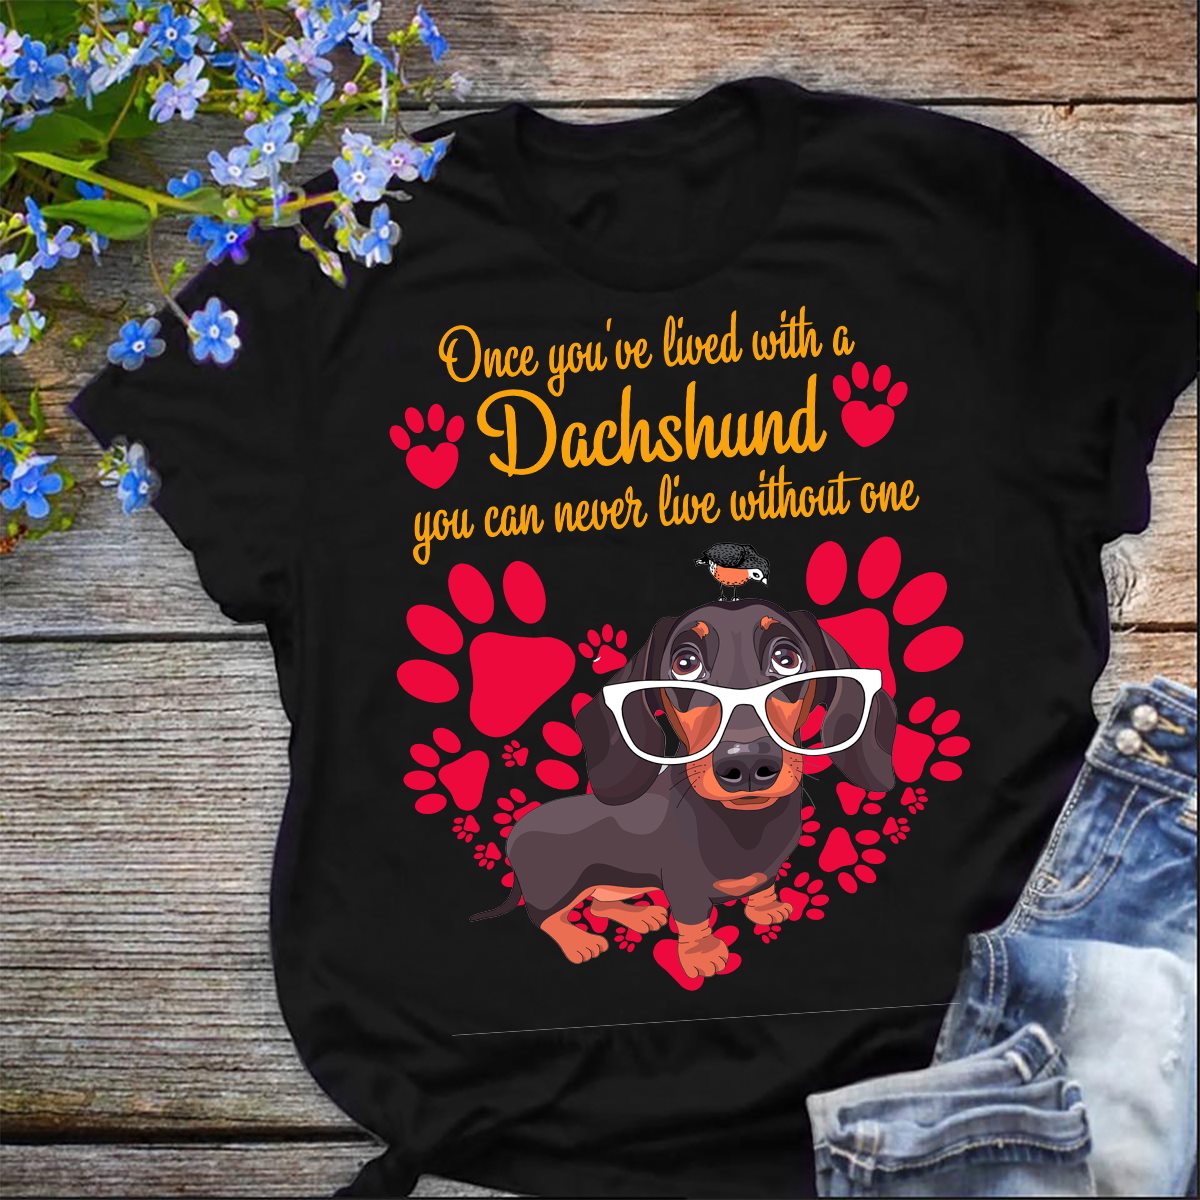 Once you've lived with a Dachshund you can never live without one